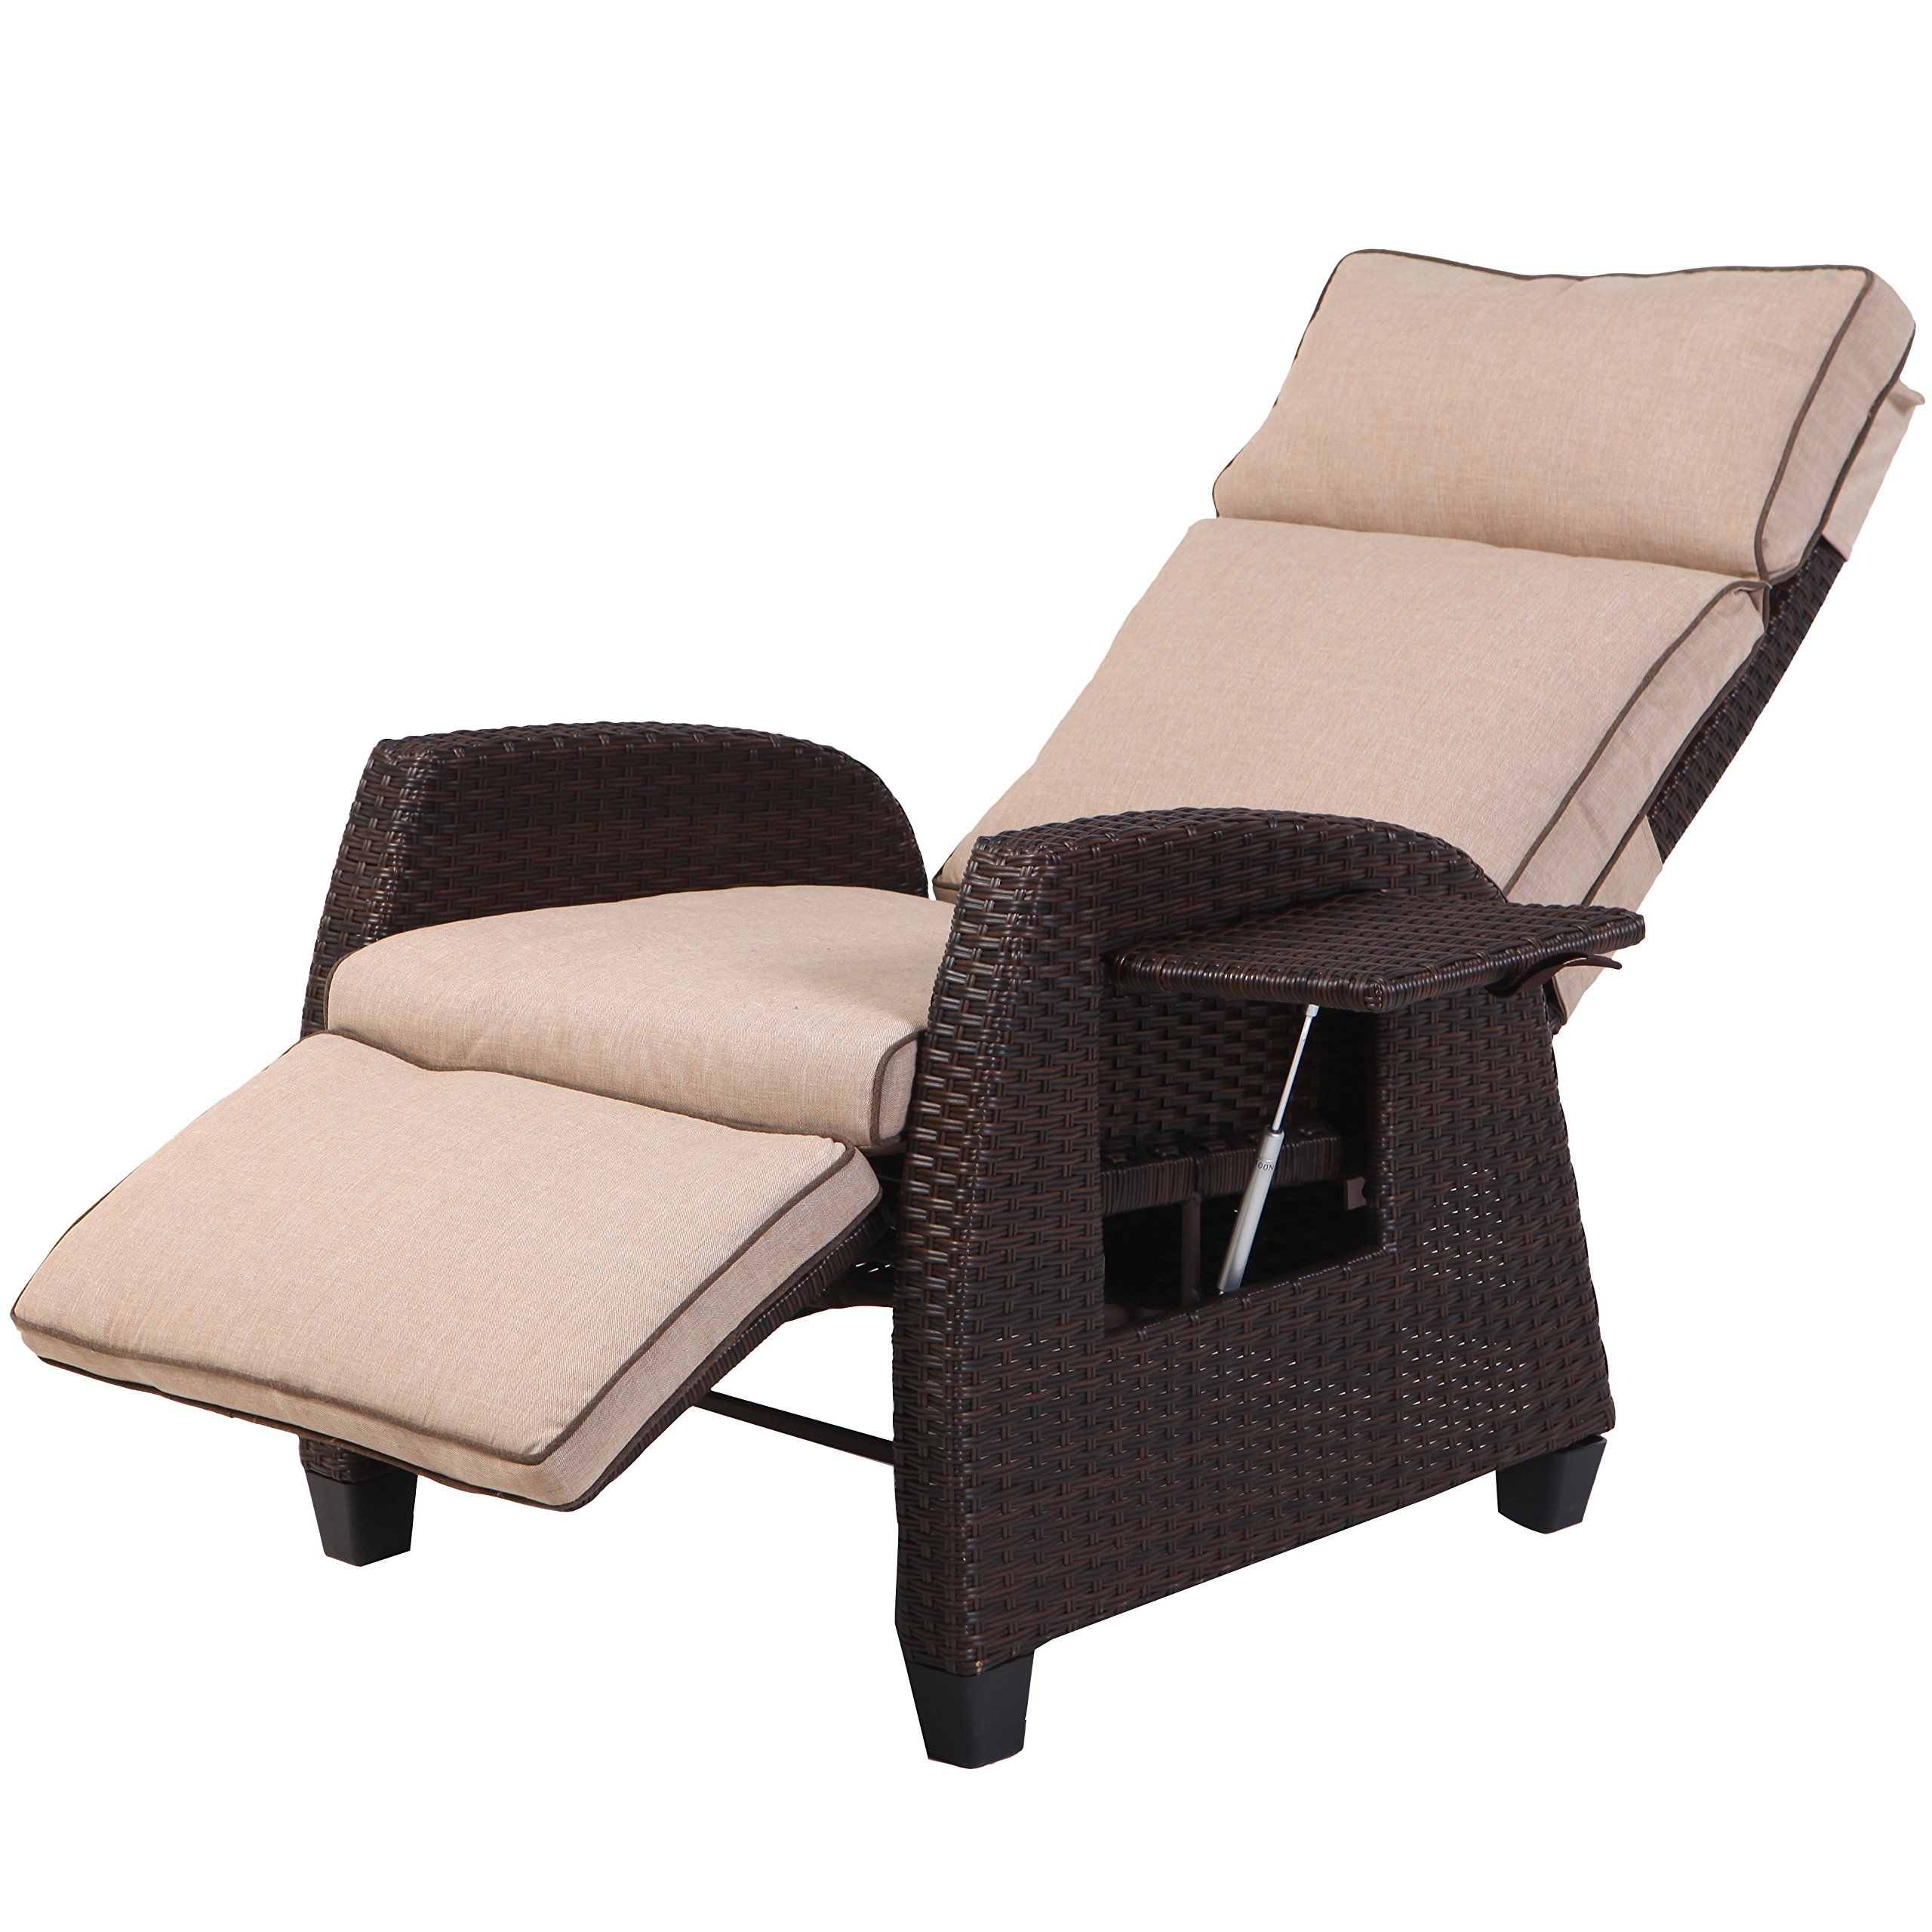 Reclining Lounge Chair Outdoor